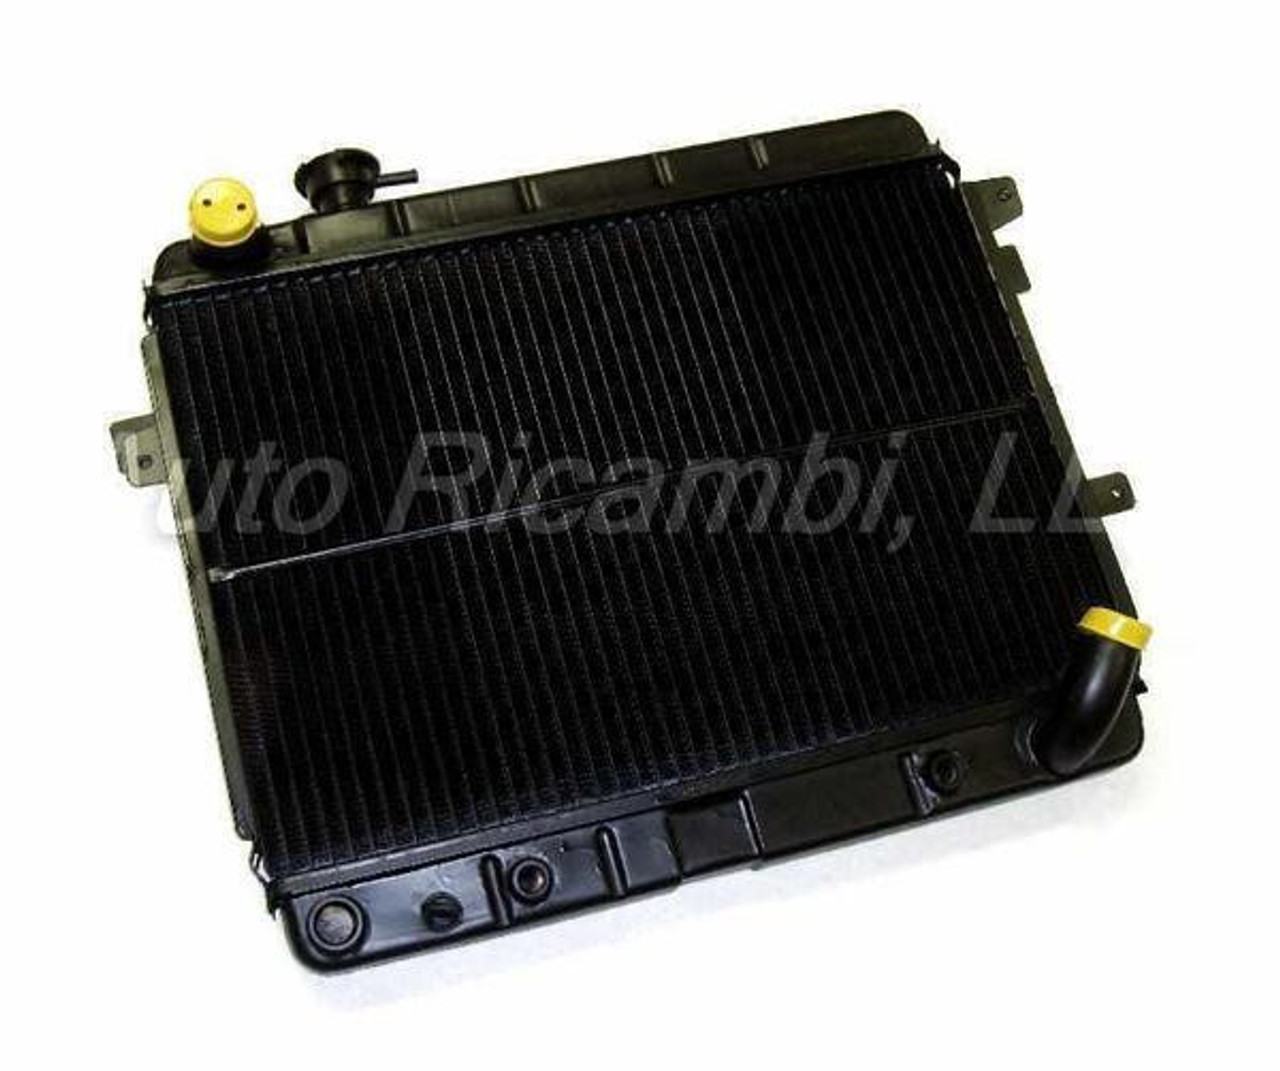 New copper core radiator
FIAT Spider 2000 and Pininfarina - 1980-1985 with Bosch fuel injection and automatic transmission (1995cc)
CO1-422-AT, 5973616, 4442460
 - Auto Ricambi